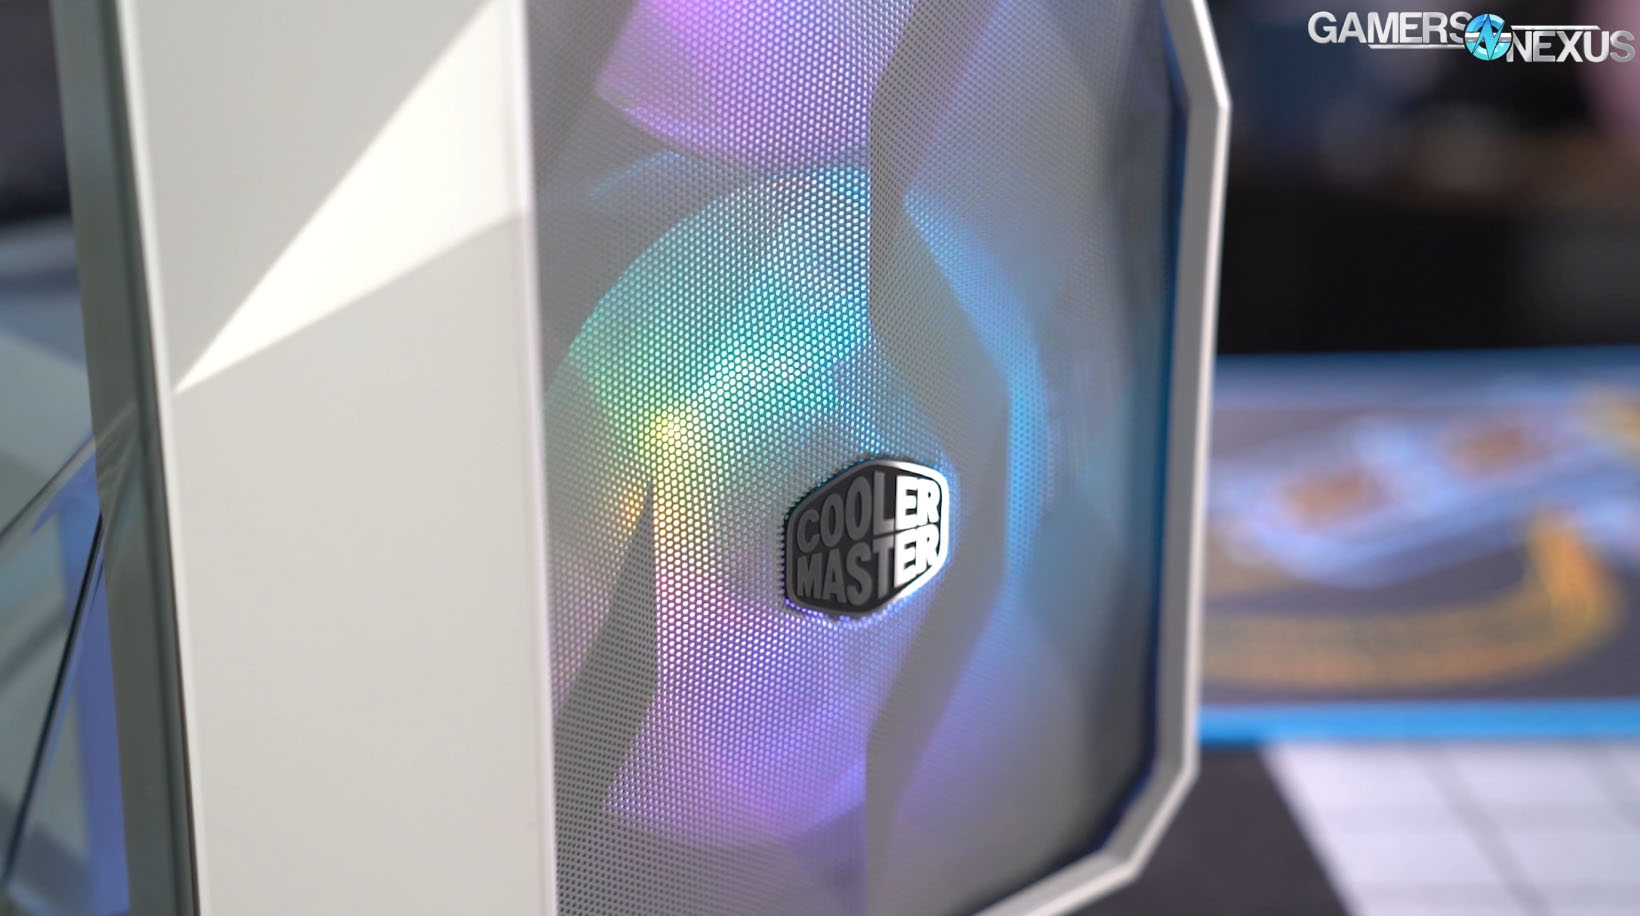 Cooler Master TD500 Mesh Case Review: Thermals, Noise, & Build